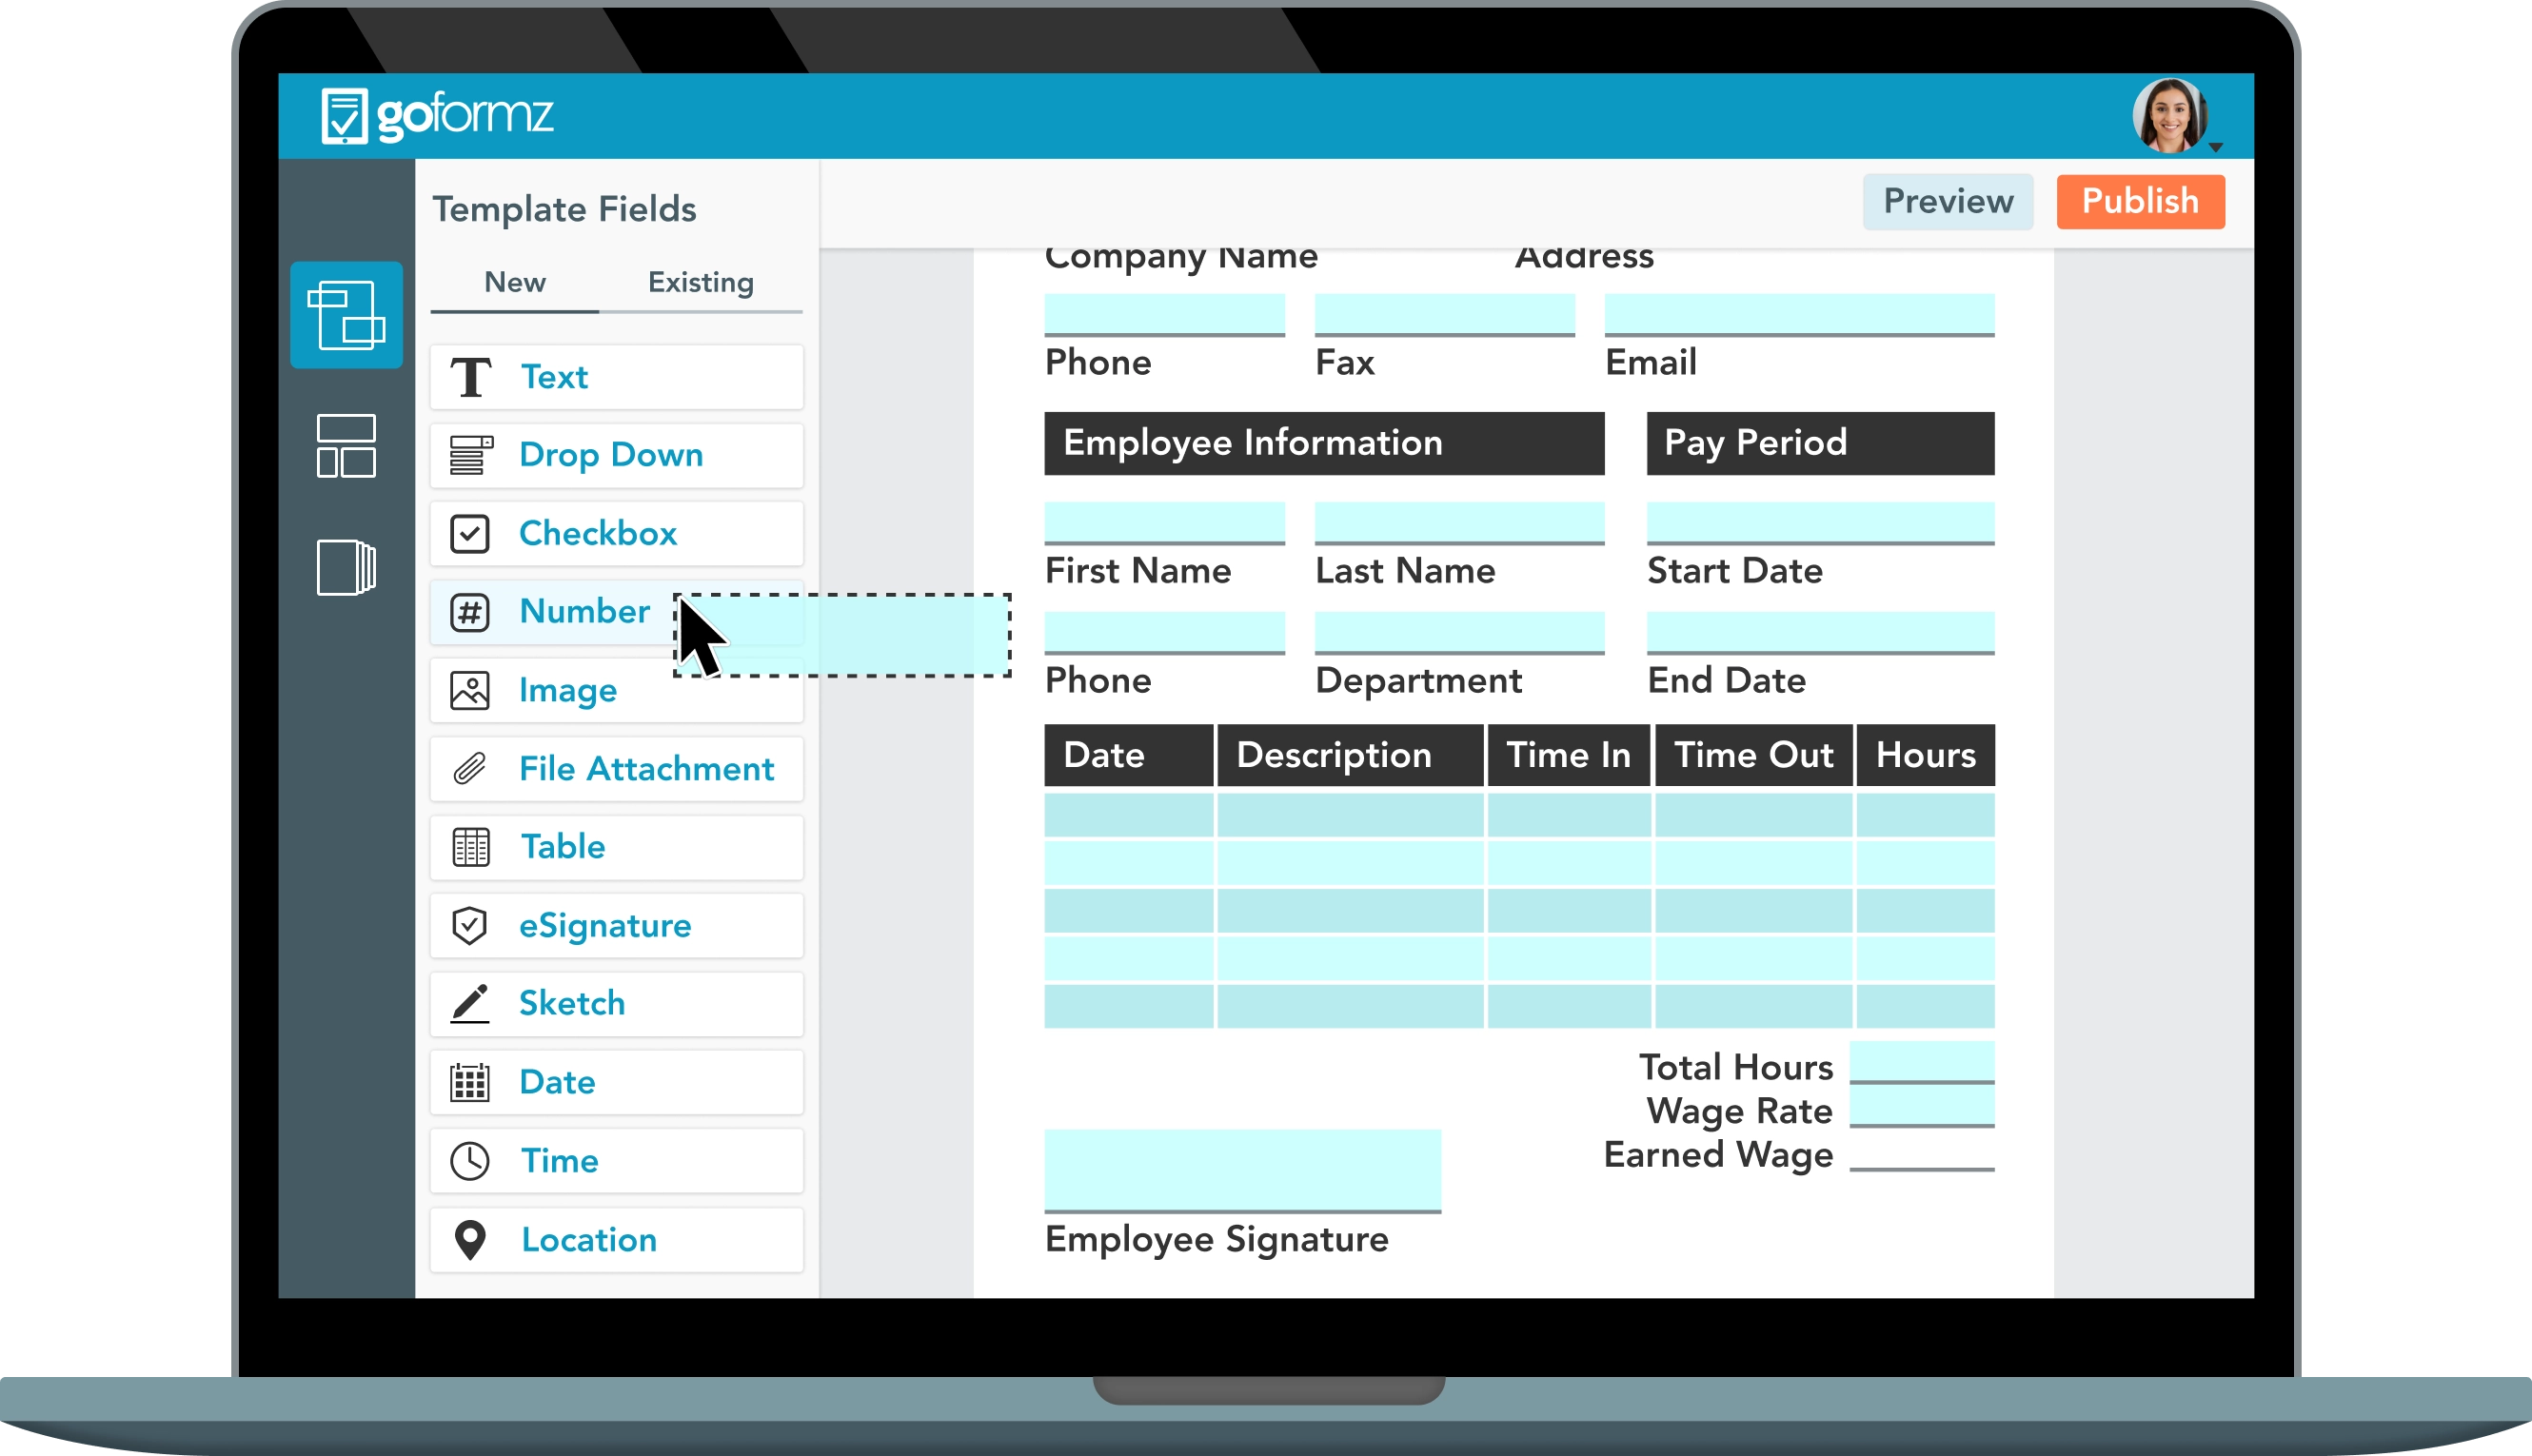 Digital timesheet templates can automate daily tasks with logic and customizations.